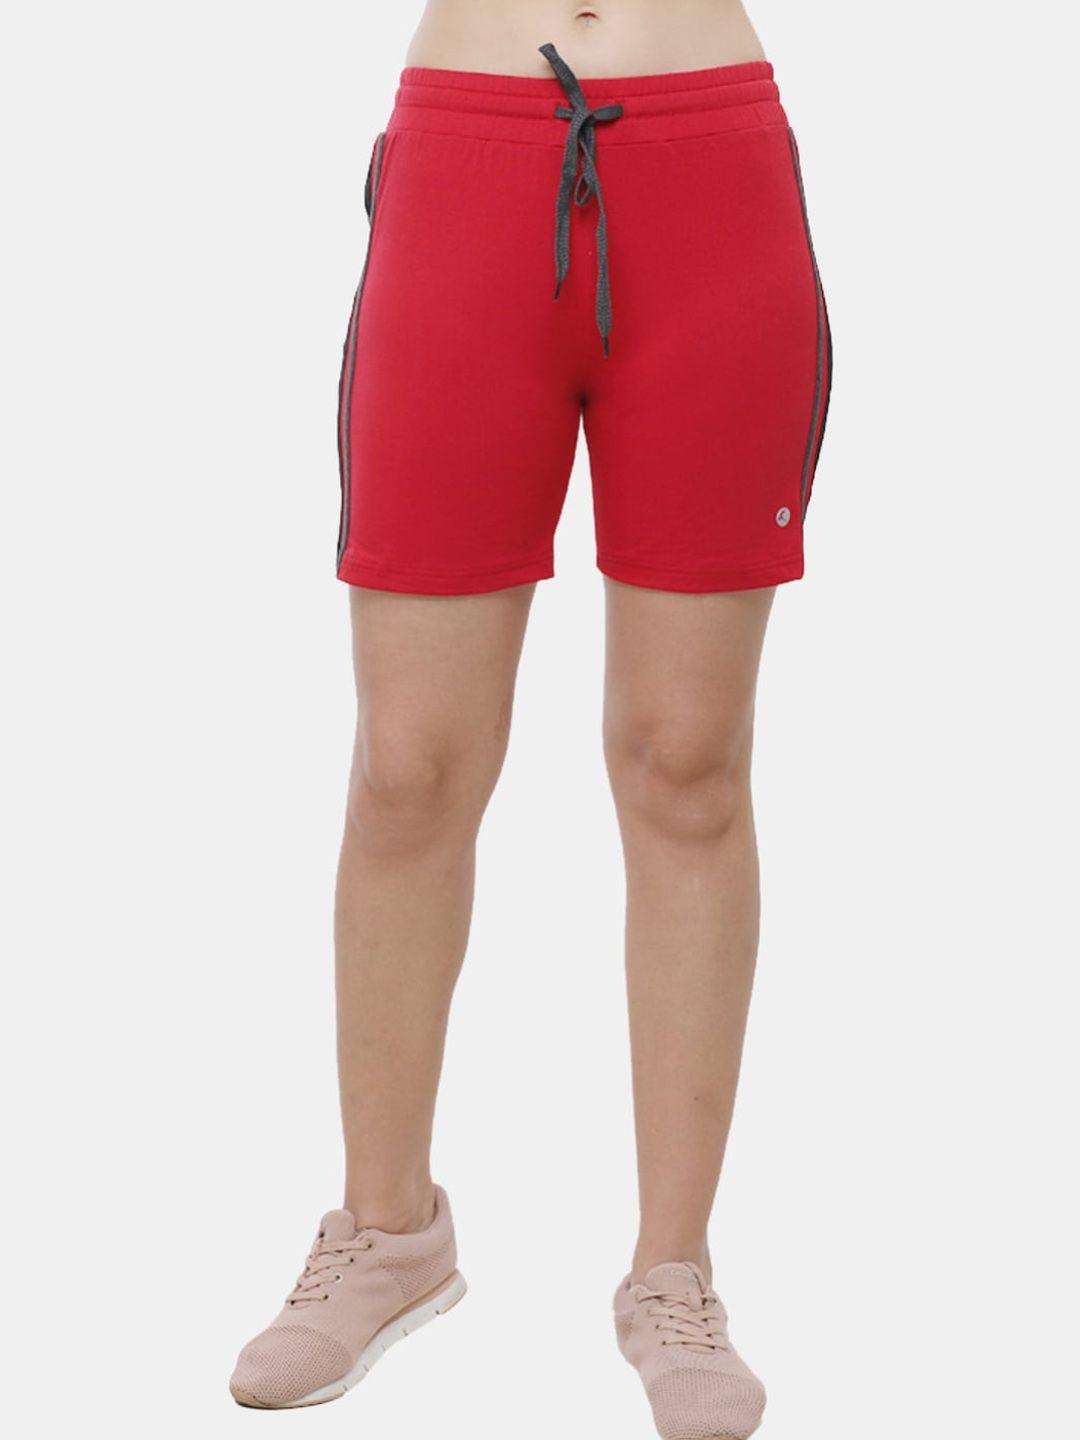 lovable sport women red cycling shorts